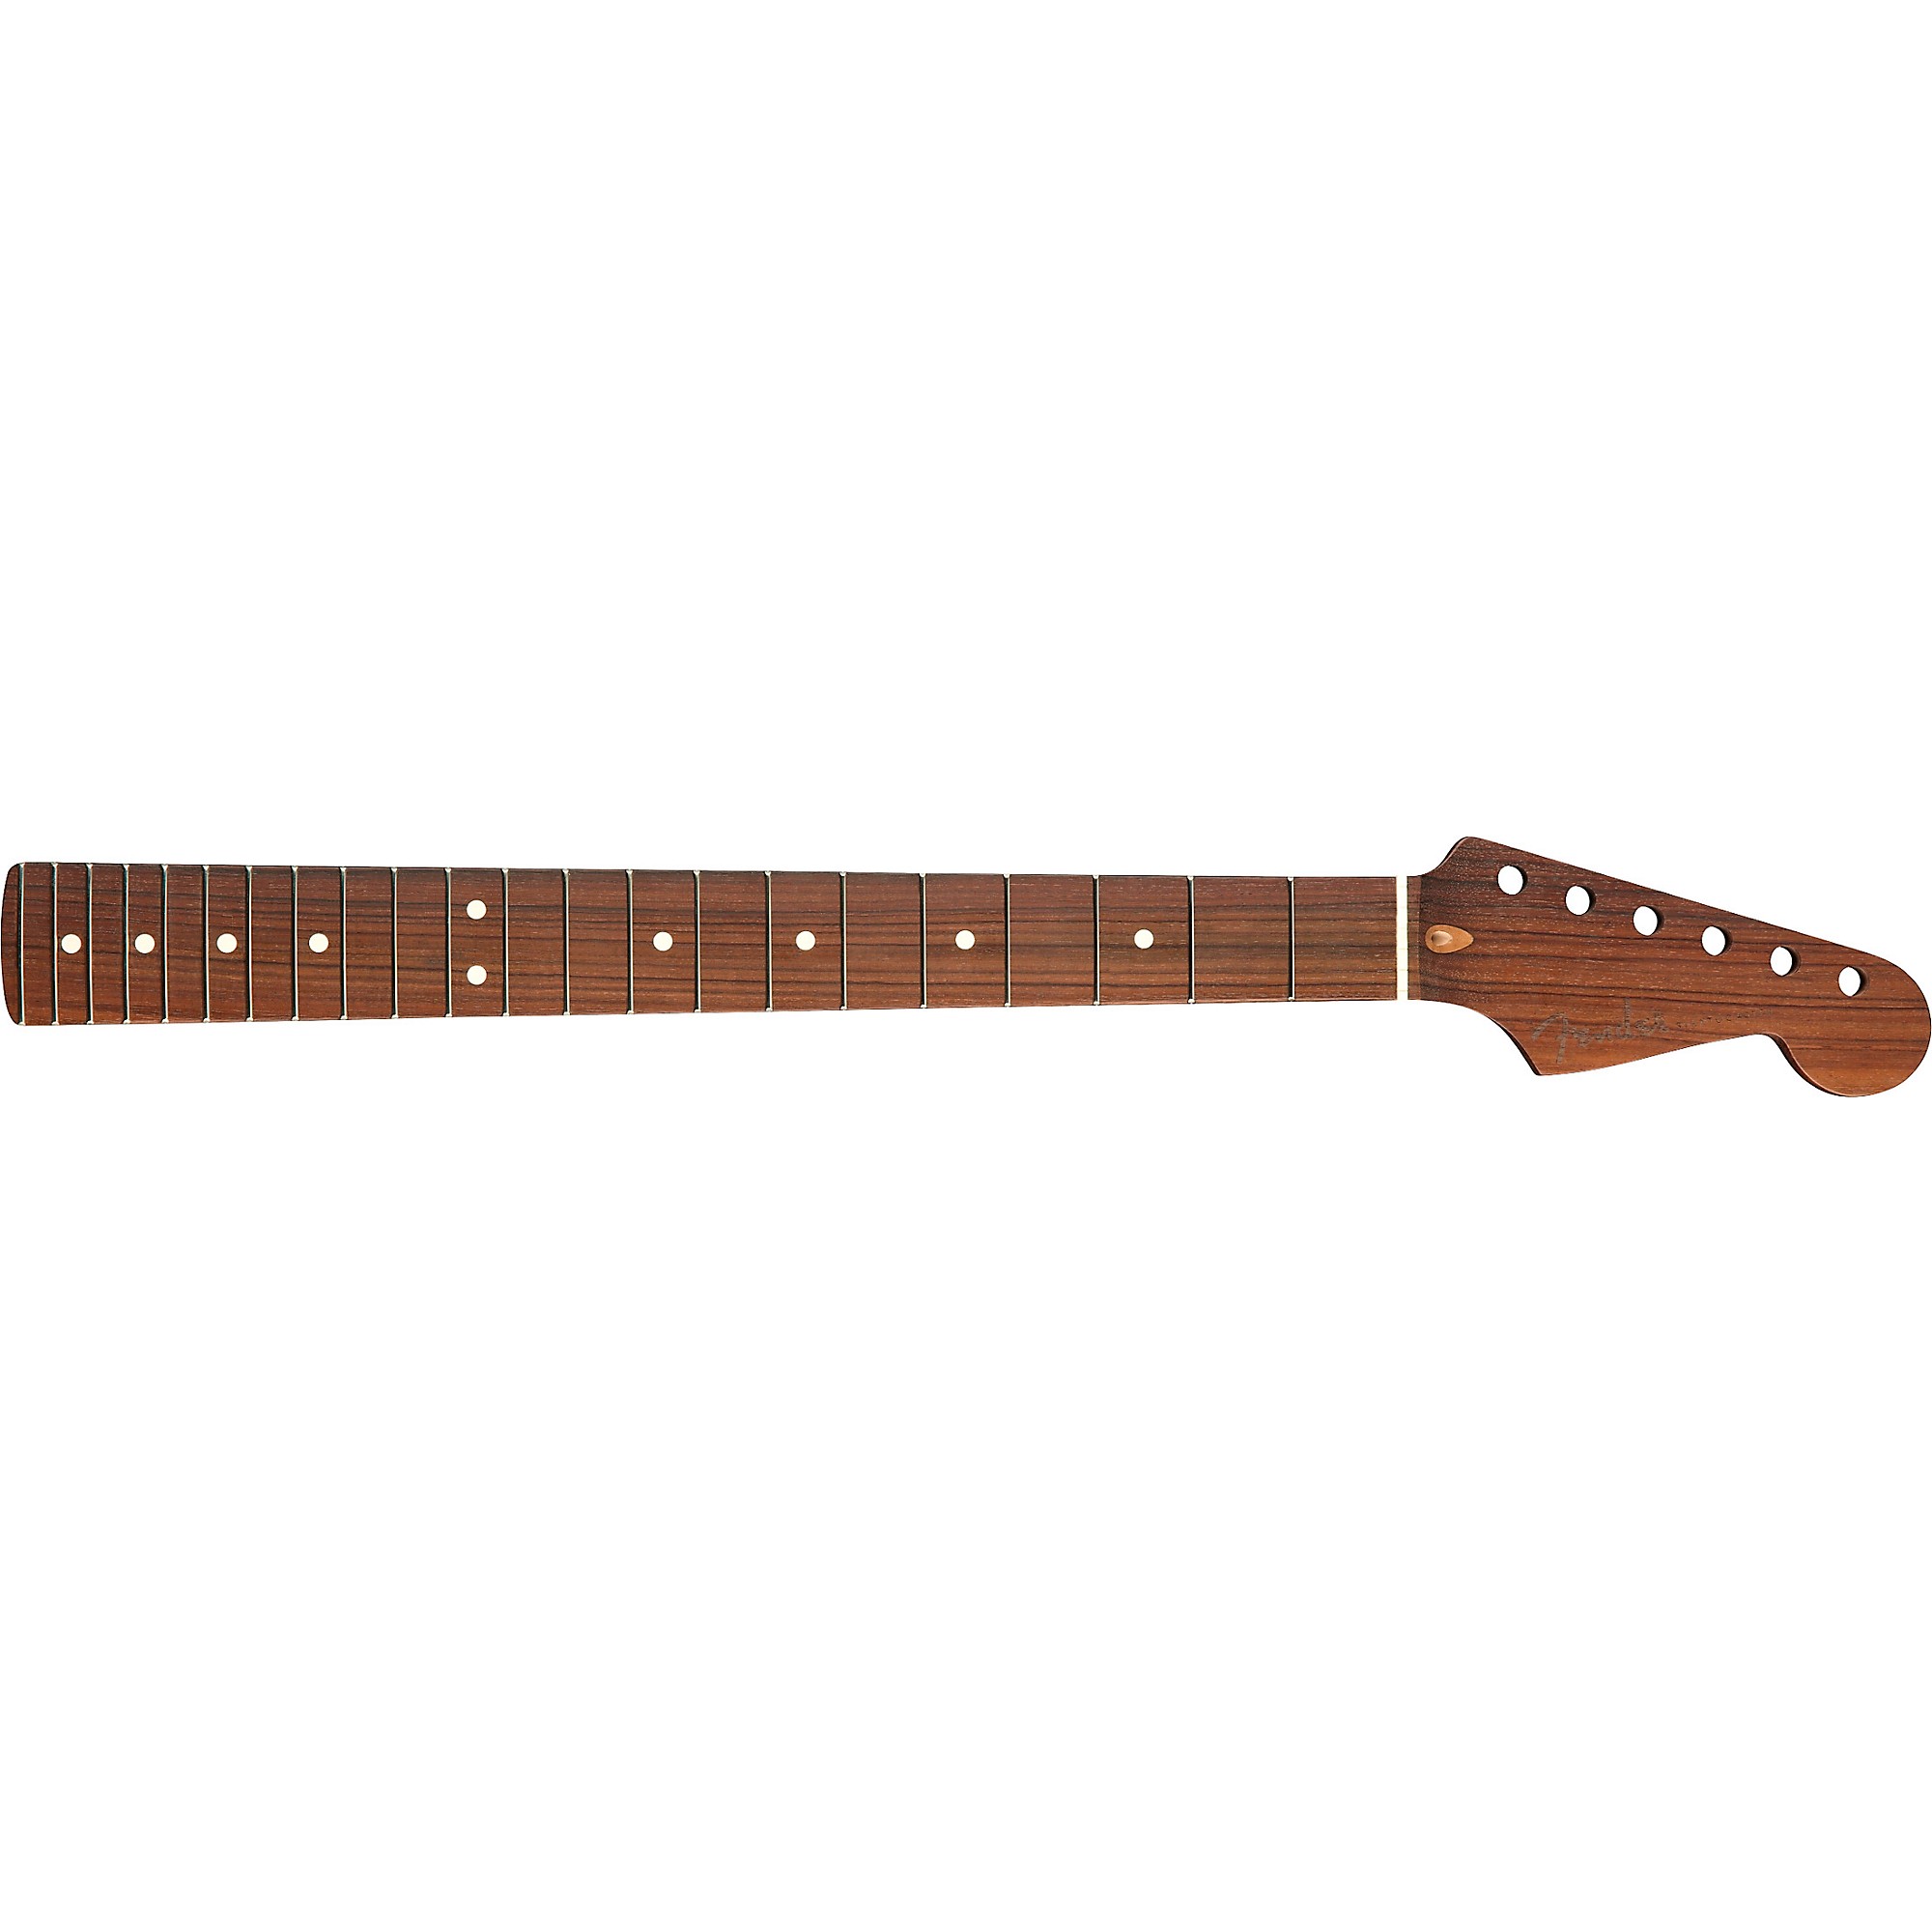 Fender American Professional Stratocaster Neck Rosewood | Guitar 